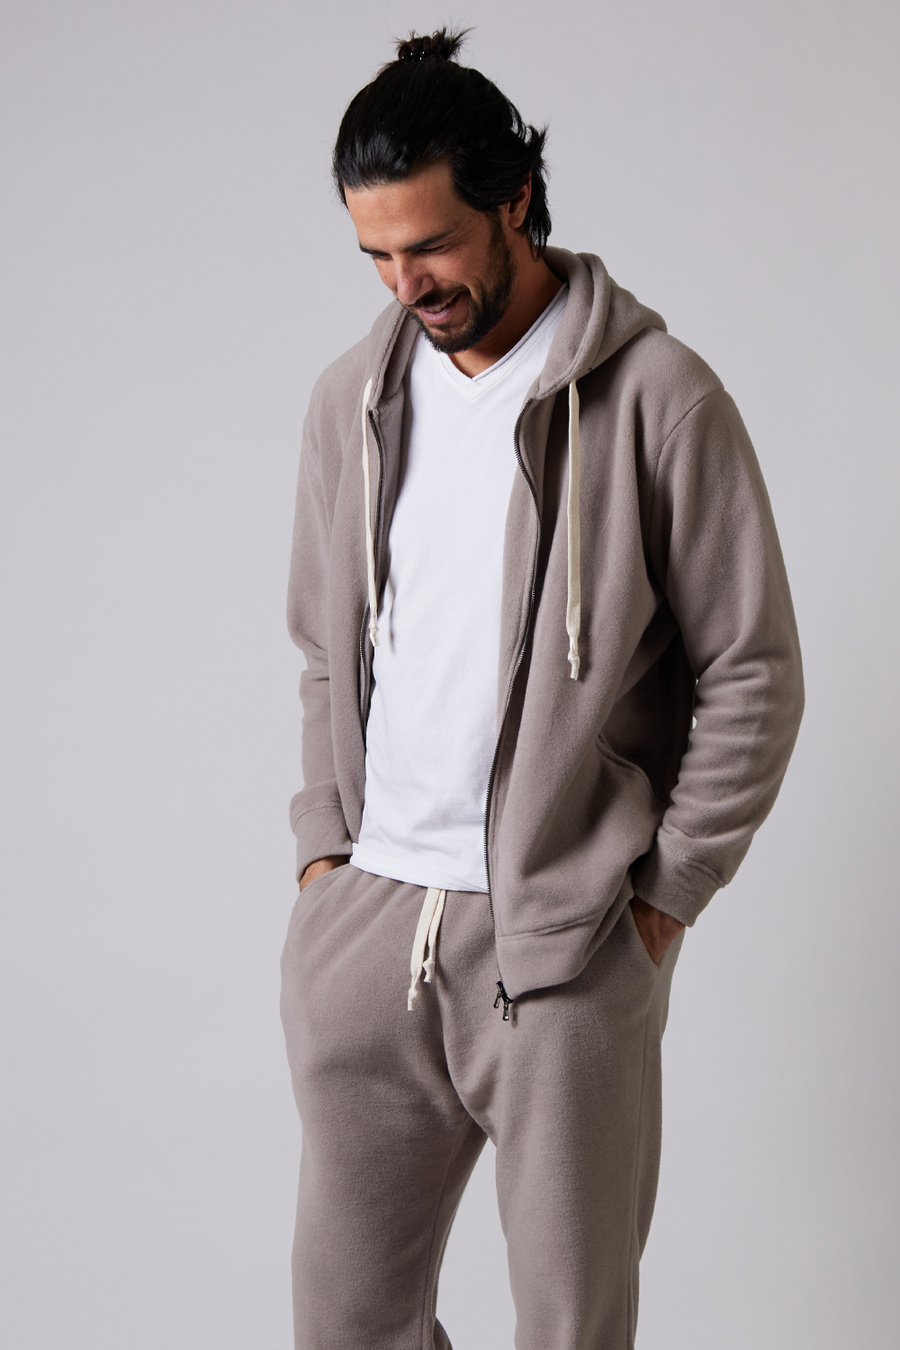 Buy the Daniele Fiesoli Soft Fleece Zip-Up Hoodie Taupe at Intro. Spend £50 for free UK delivery. Official stockists. We ship worldwide.